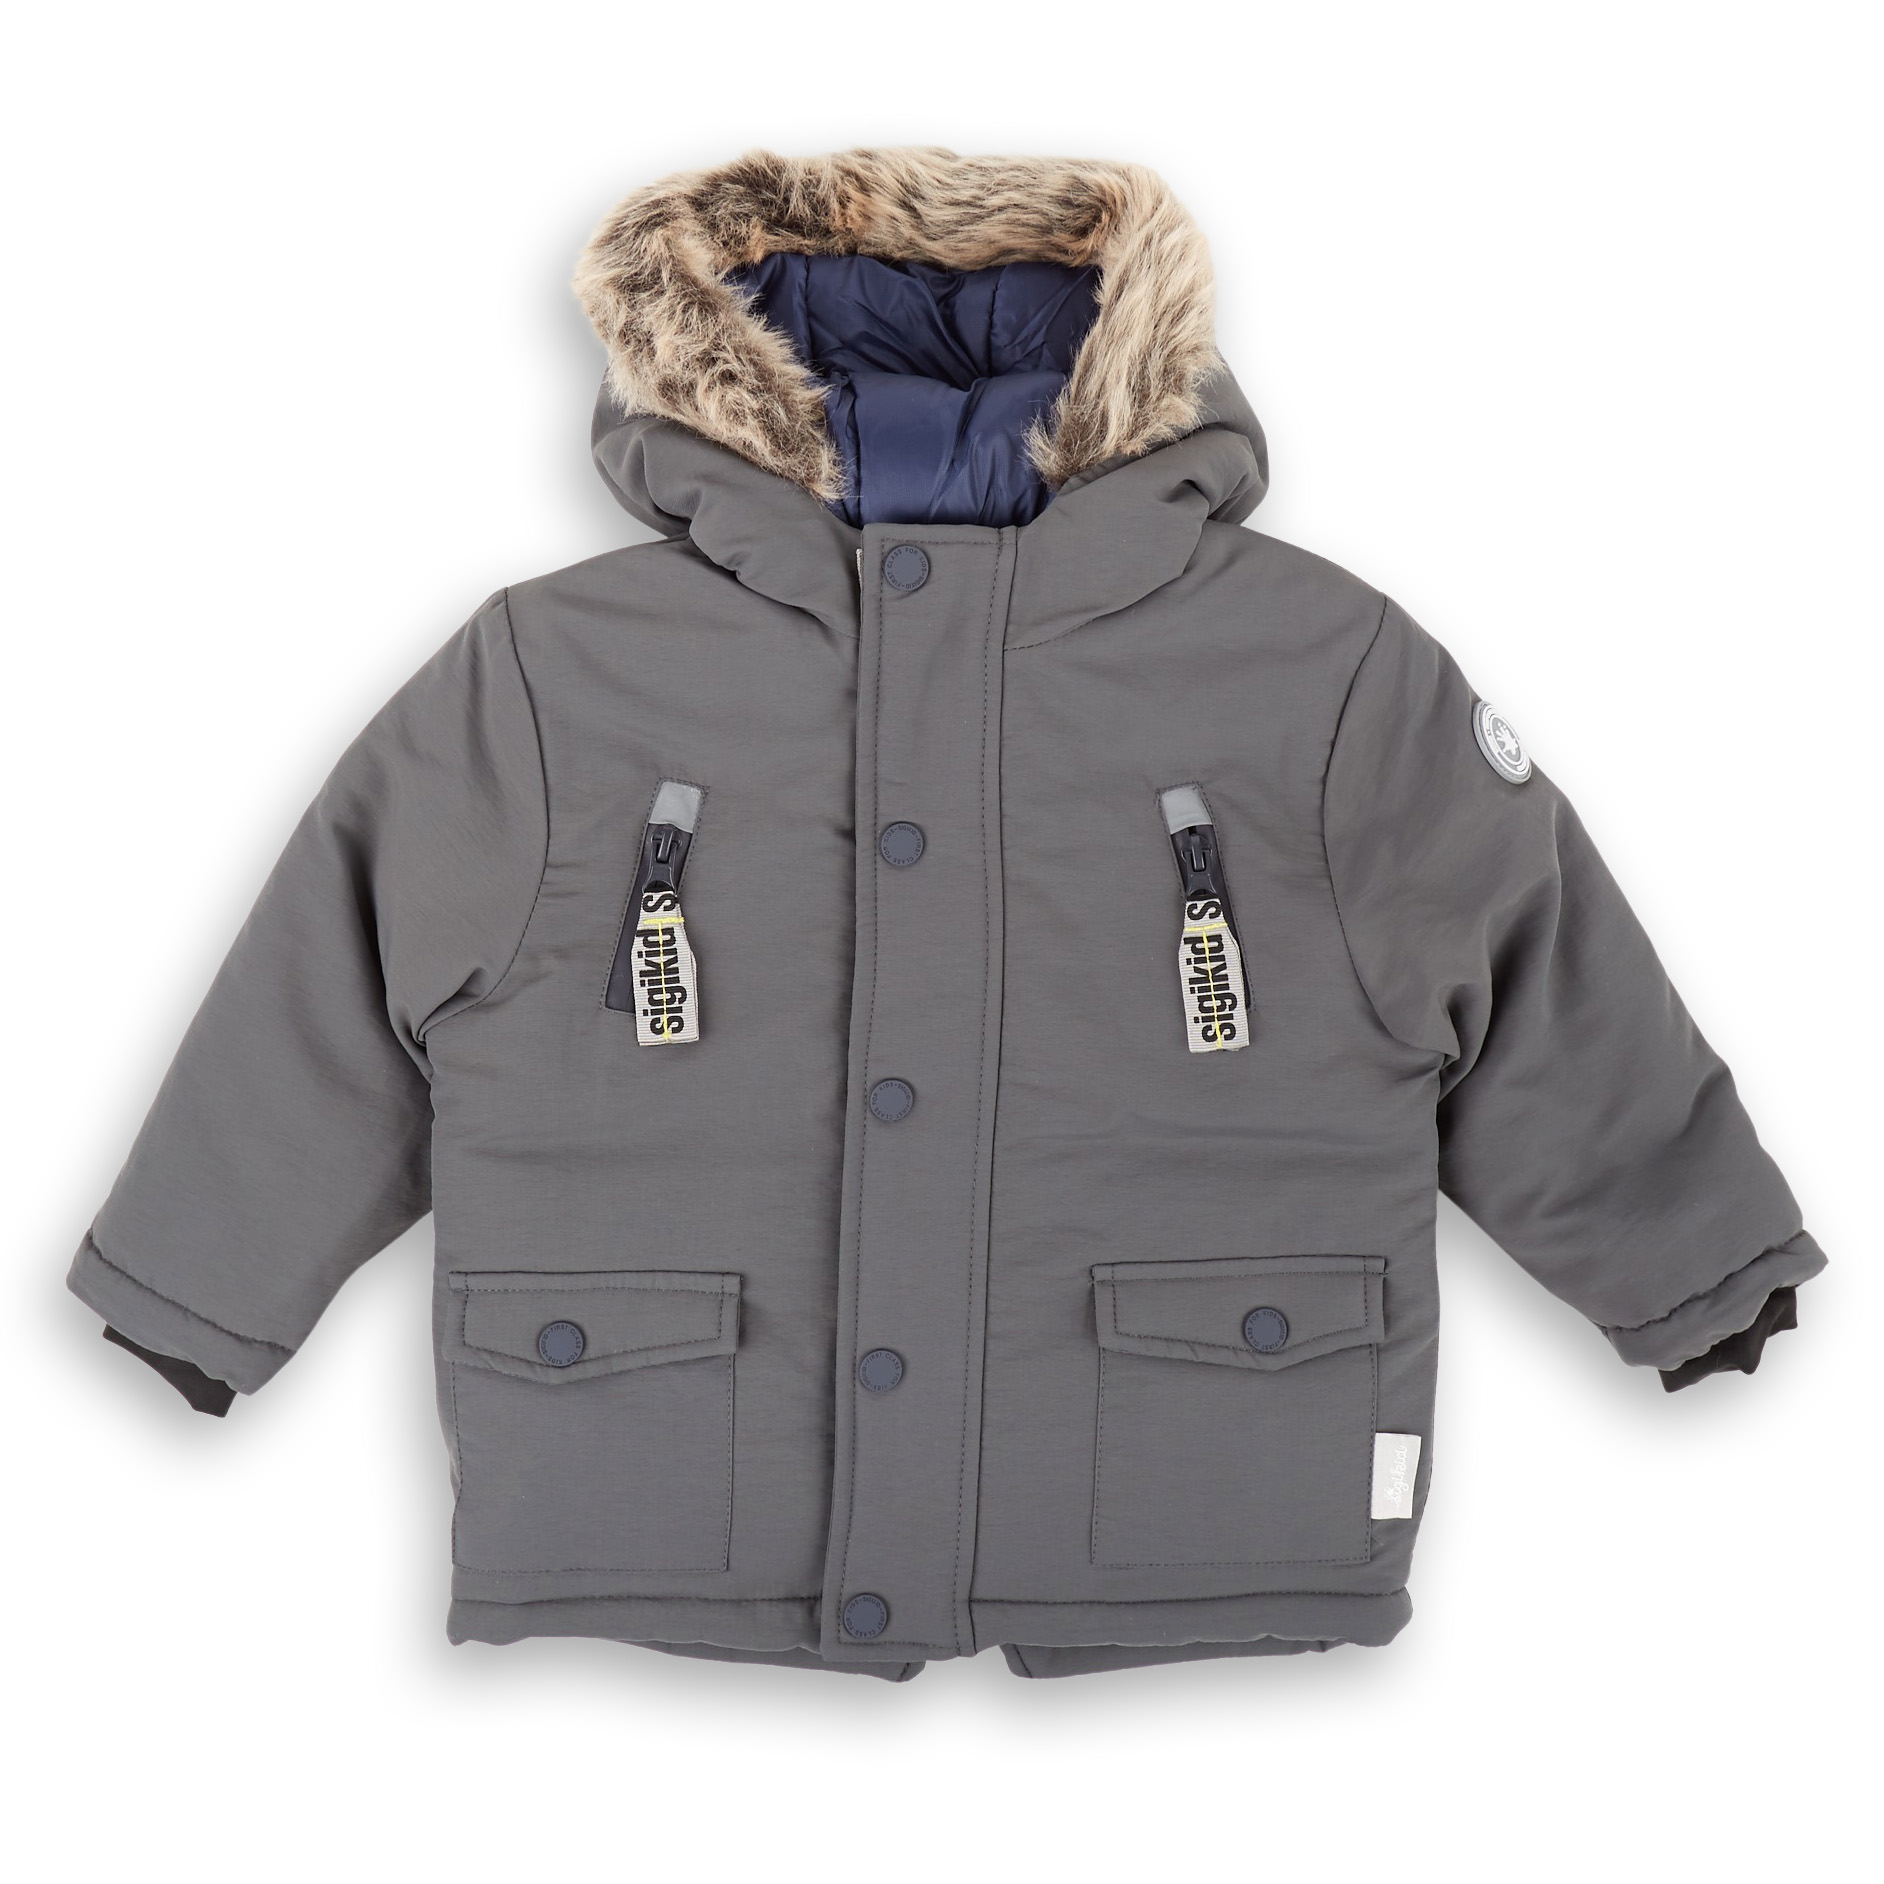 Insulated hooded winter jacket, dark grey, for babies and toddlers